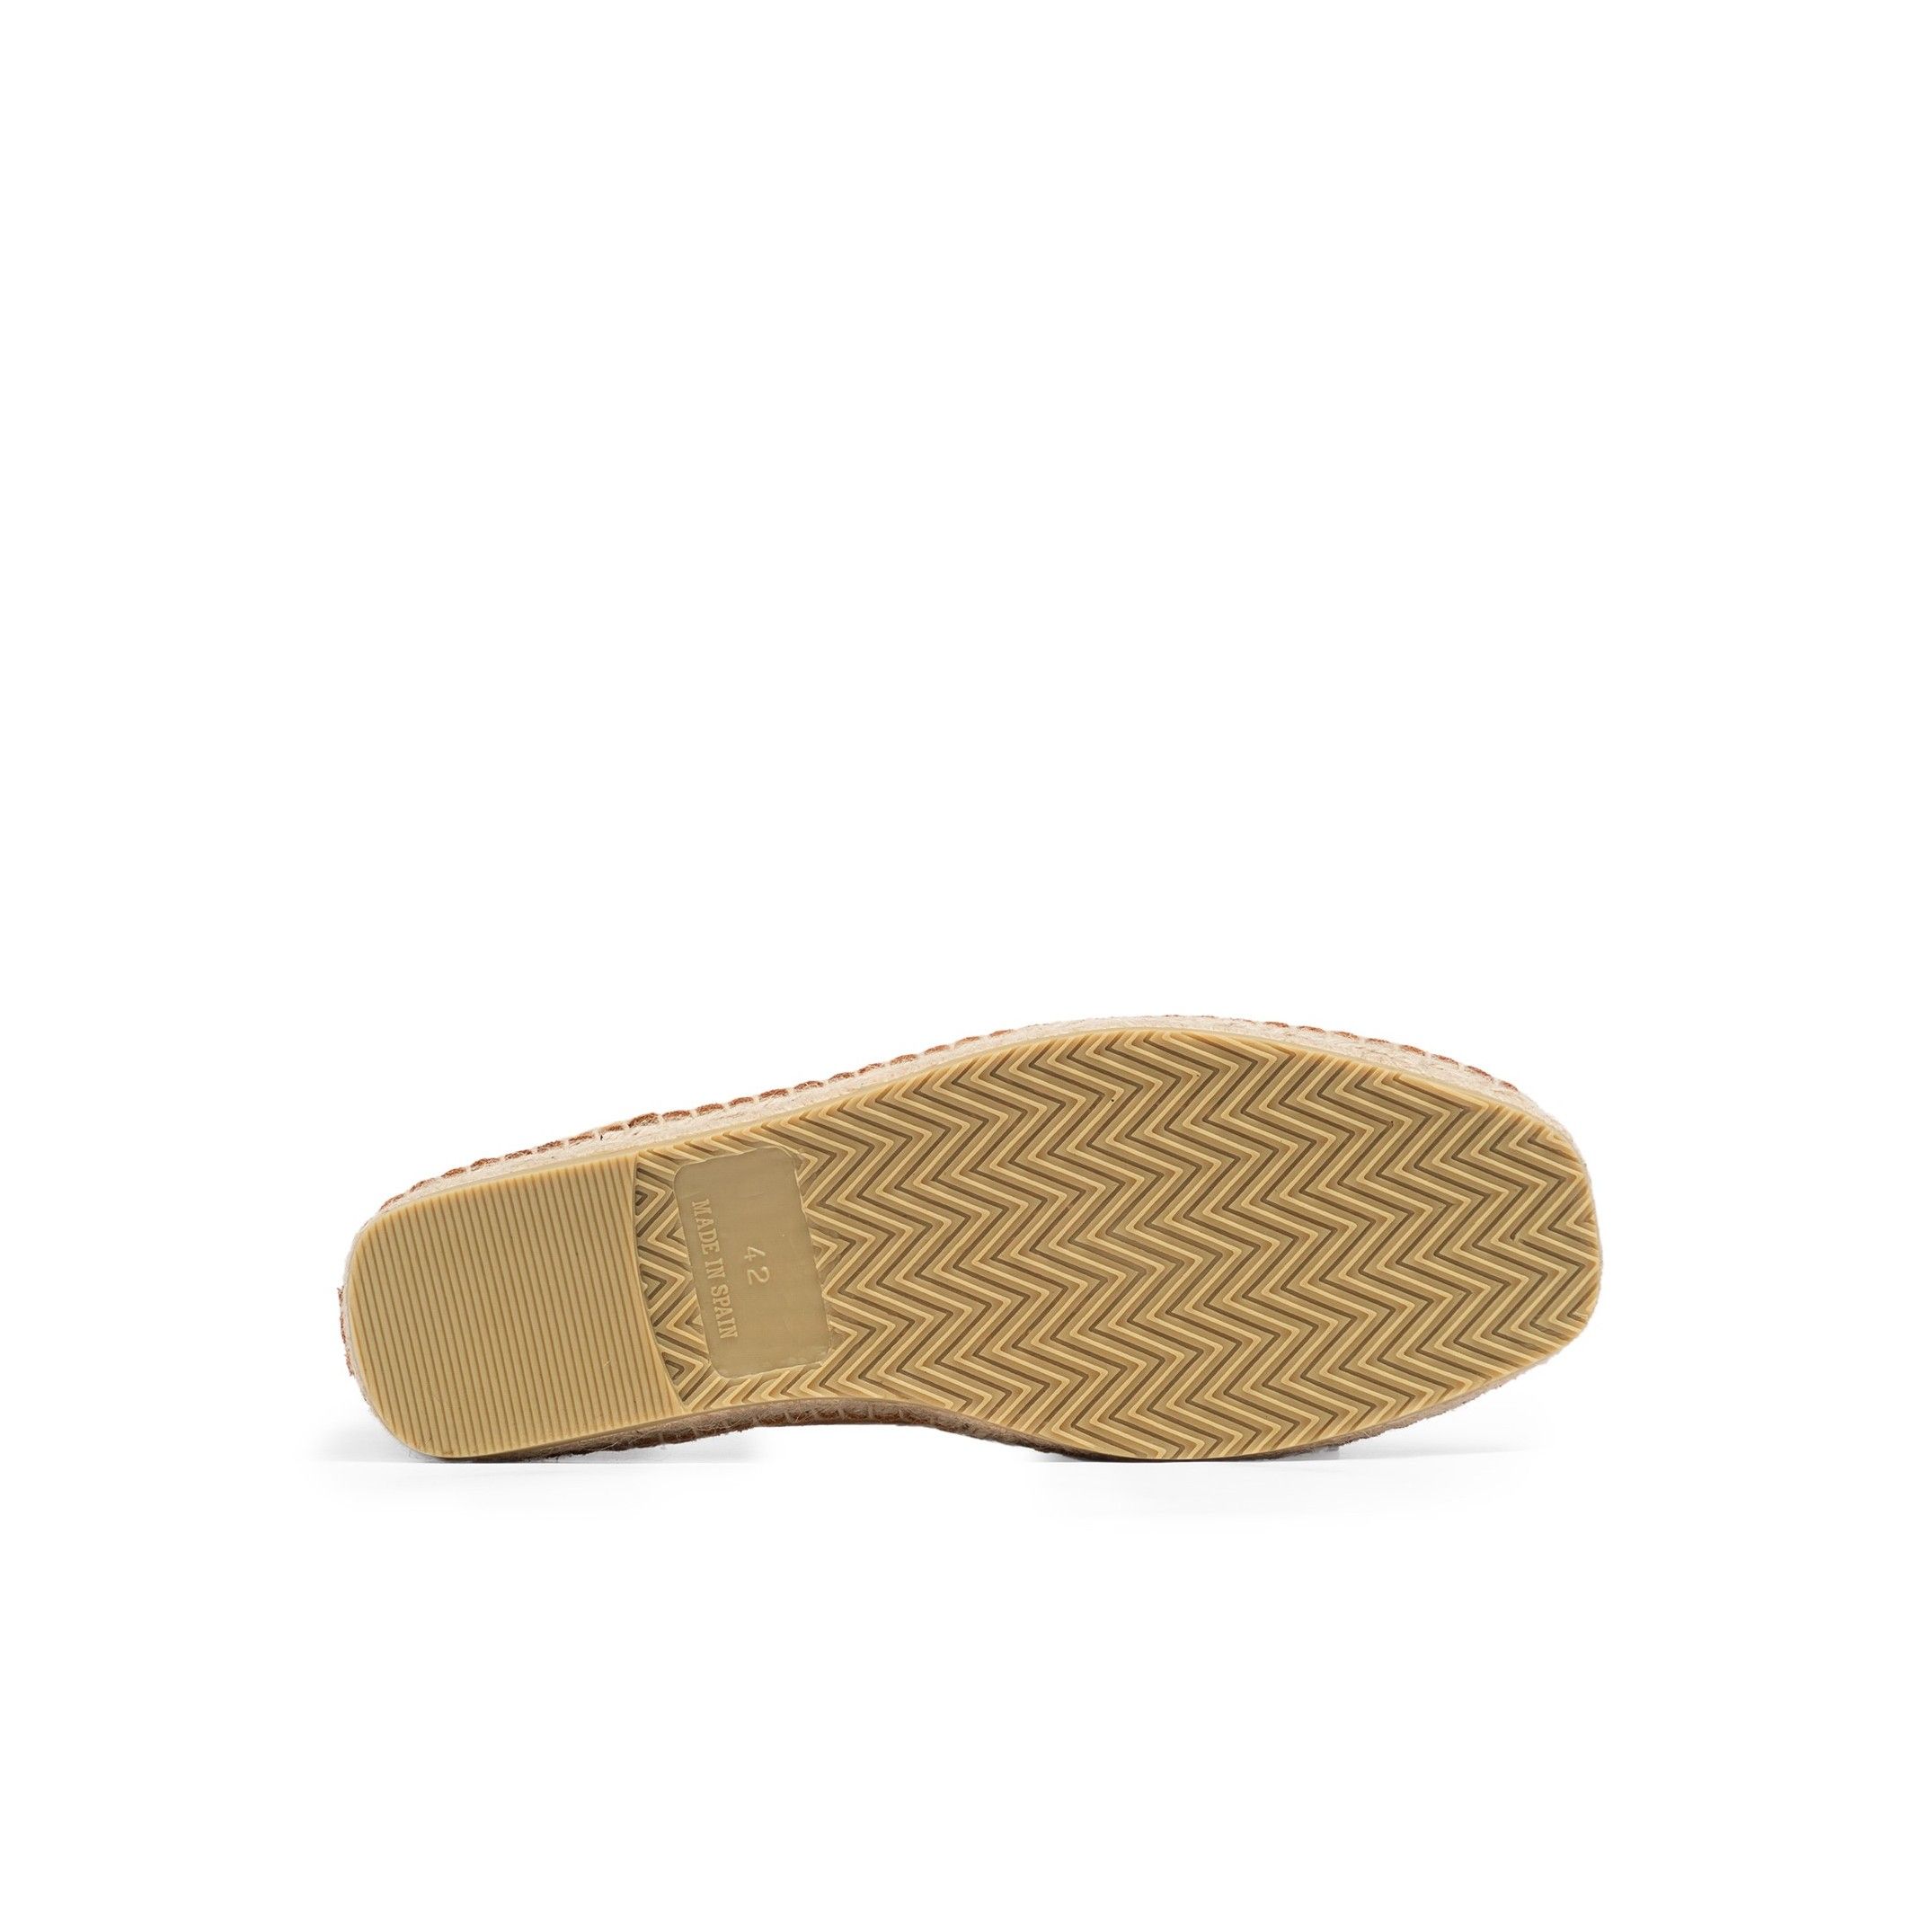 Flat espadrilles with laces closure, by Son Castellanisimos. Upper made of cowhide leather. Cotton laces closure. Inner lining and insole: 25% of cowhide leather and 75% of textile. Sole material: synthetic and non slip. Heel height: 2 cm. Designed and made in Spain.